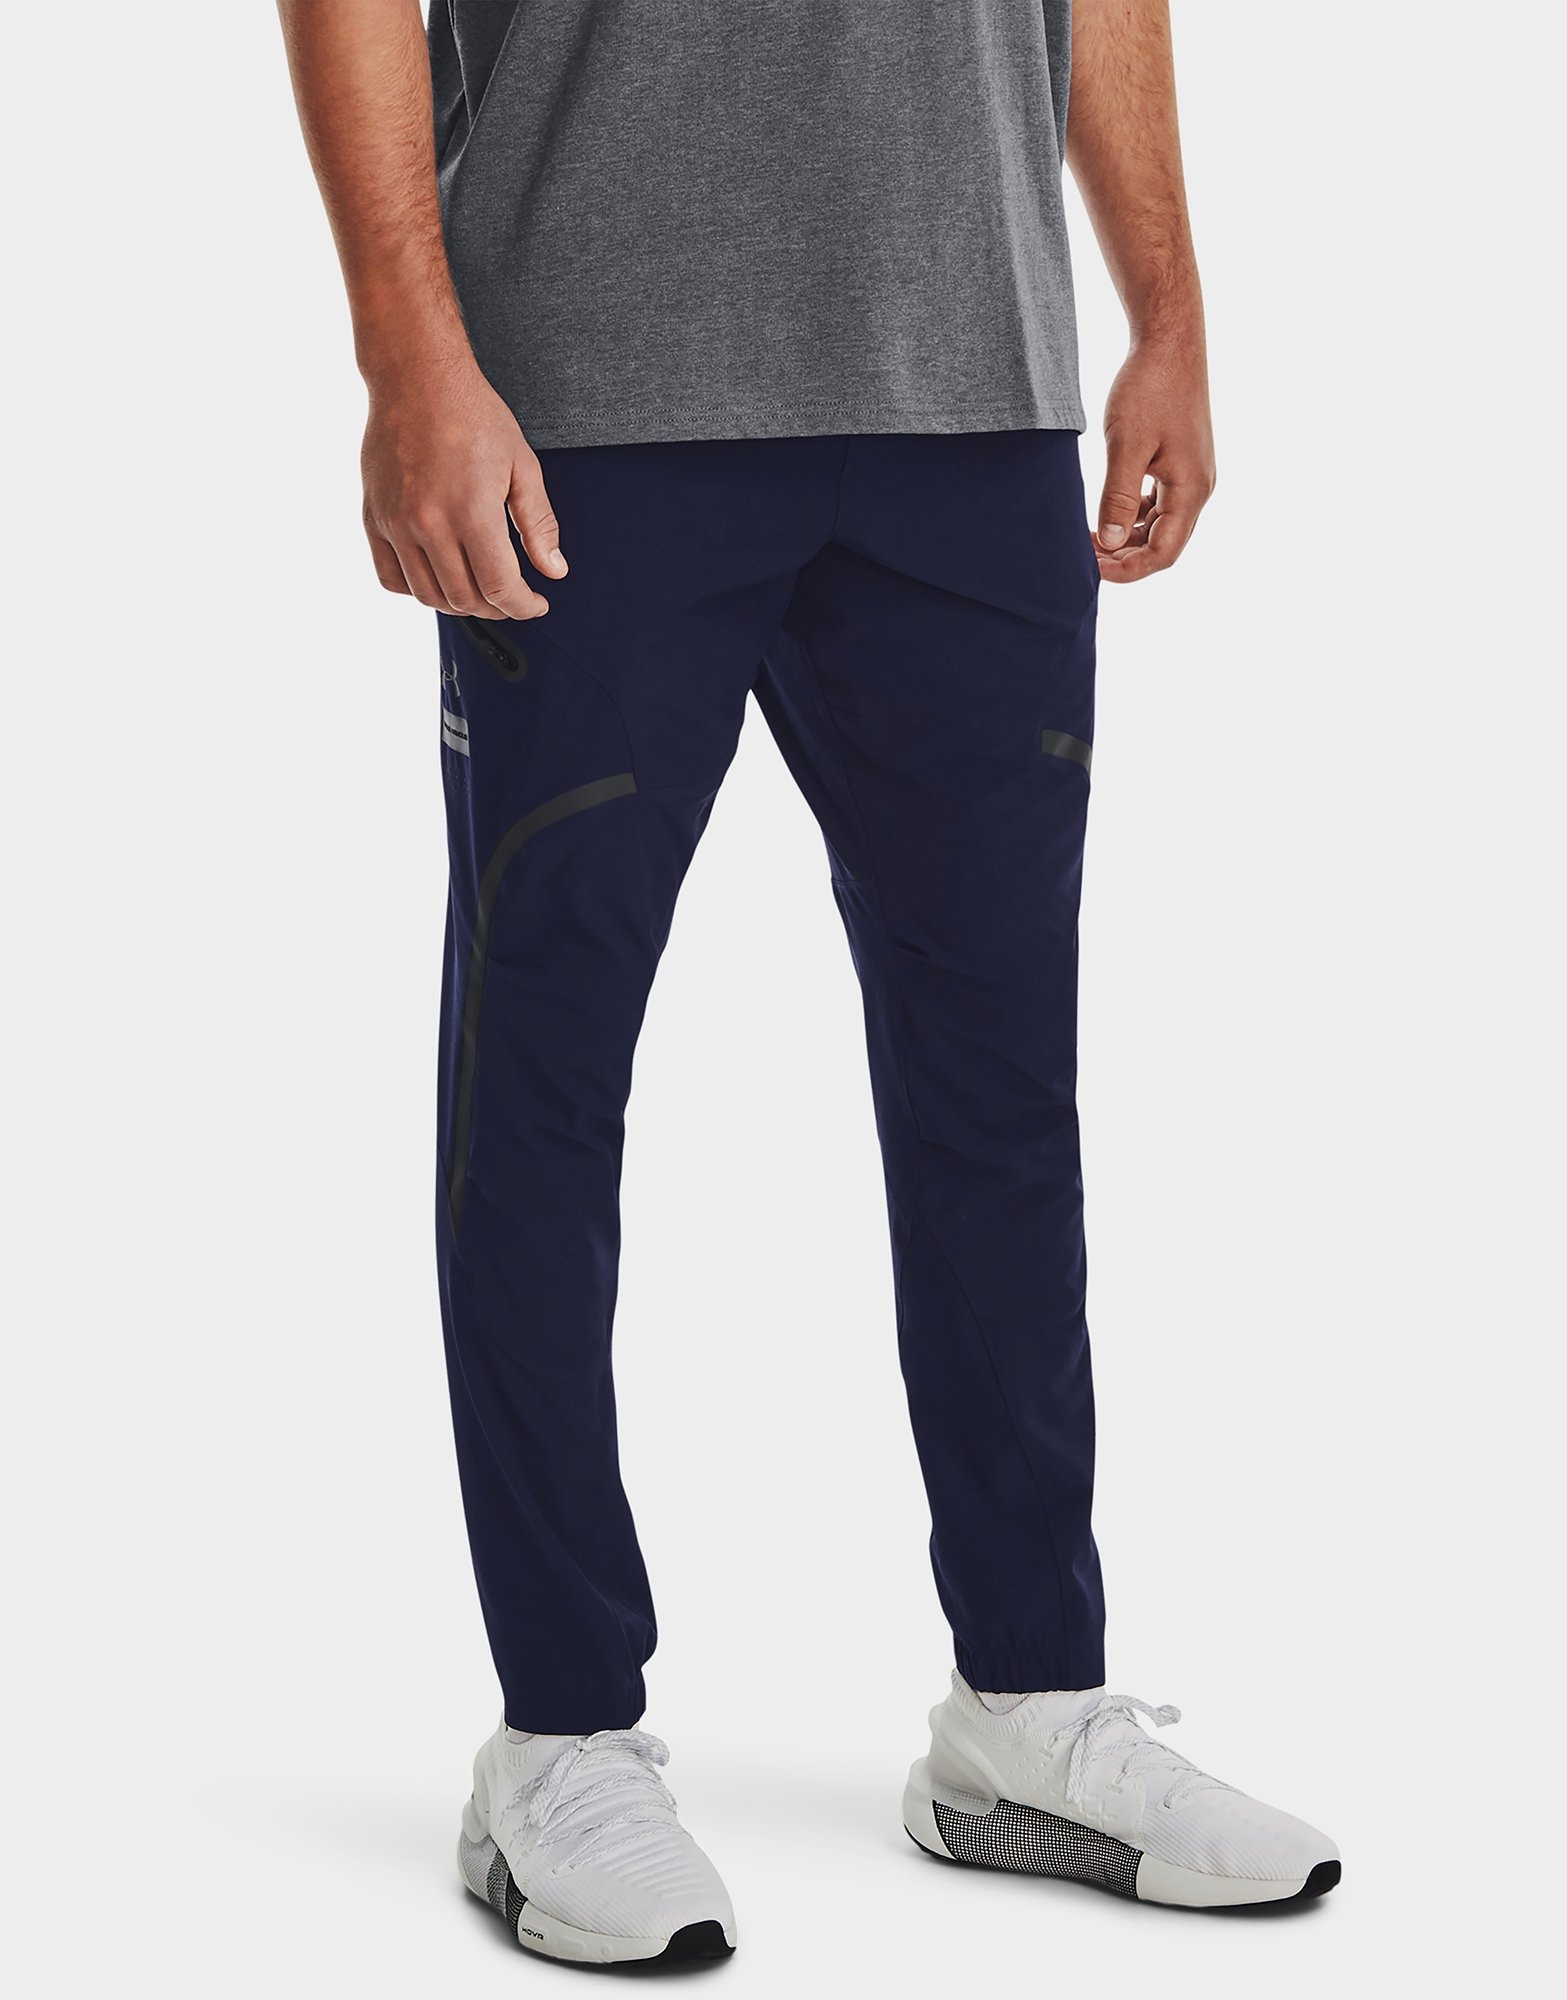 Blue Under Armour Stretch Woven Utility Pants | JD Sports UK